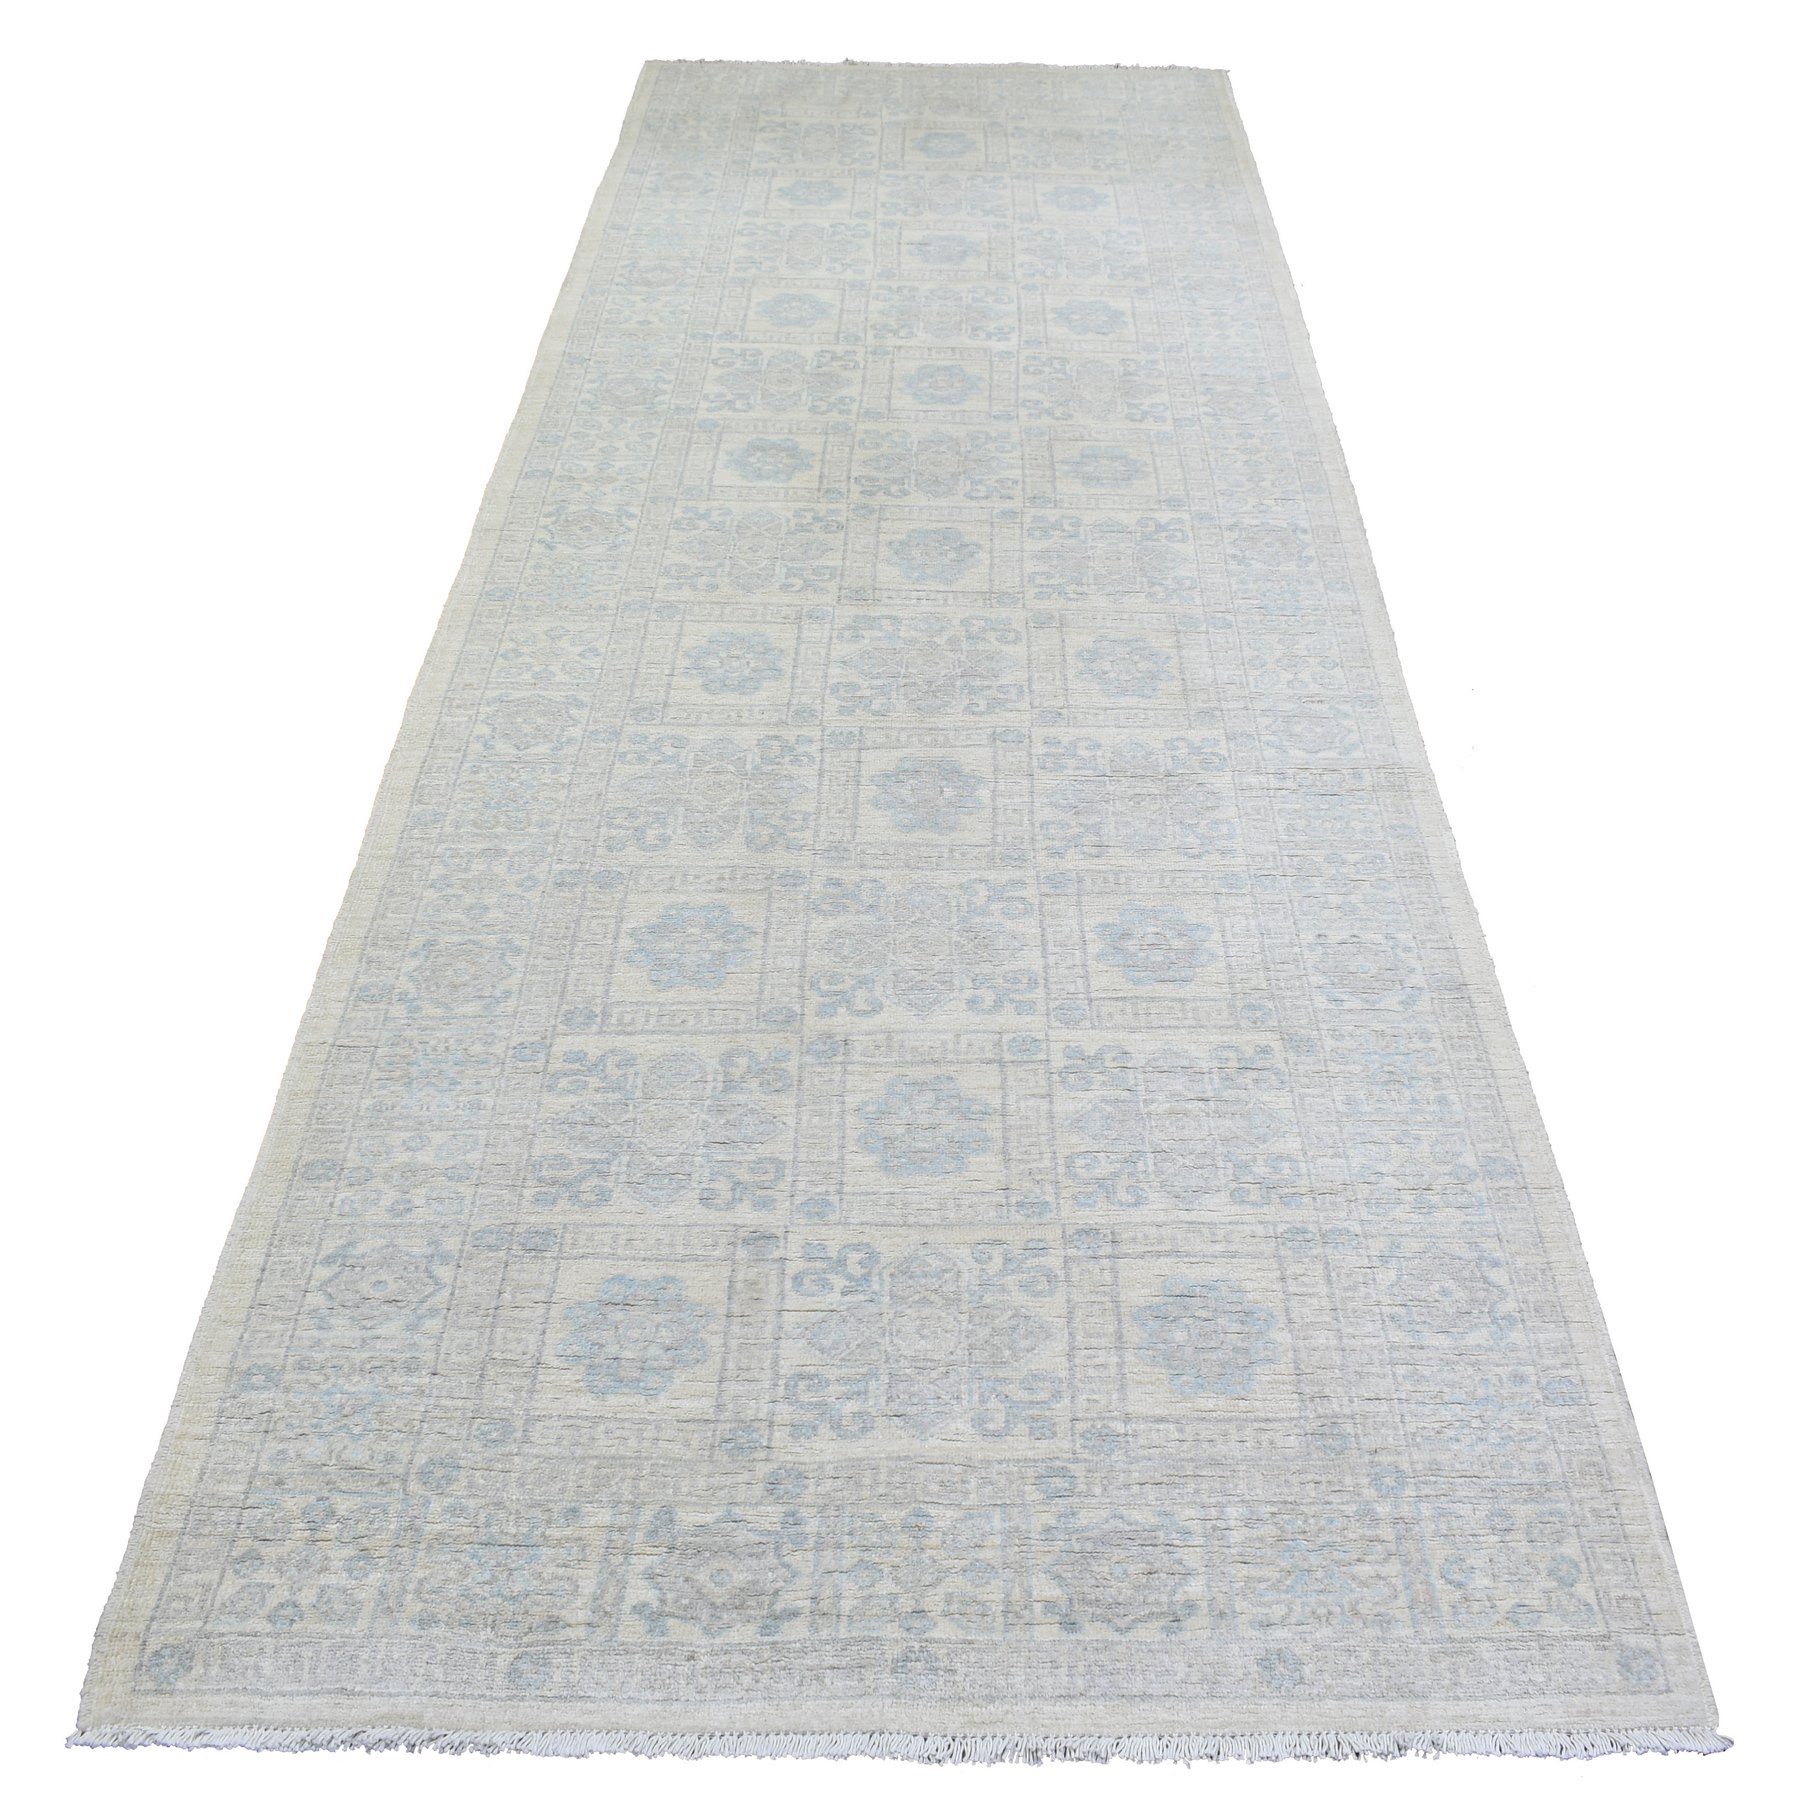 4'x11'8" Ivory, White Wash Peshawar with Geometric Design Natural Dyes, Organic Wool Hand Woven, Wide Runner Oriental Rug 